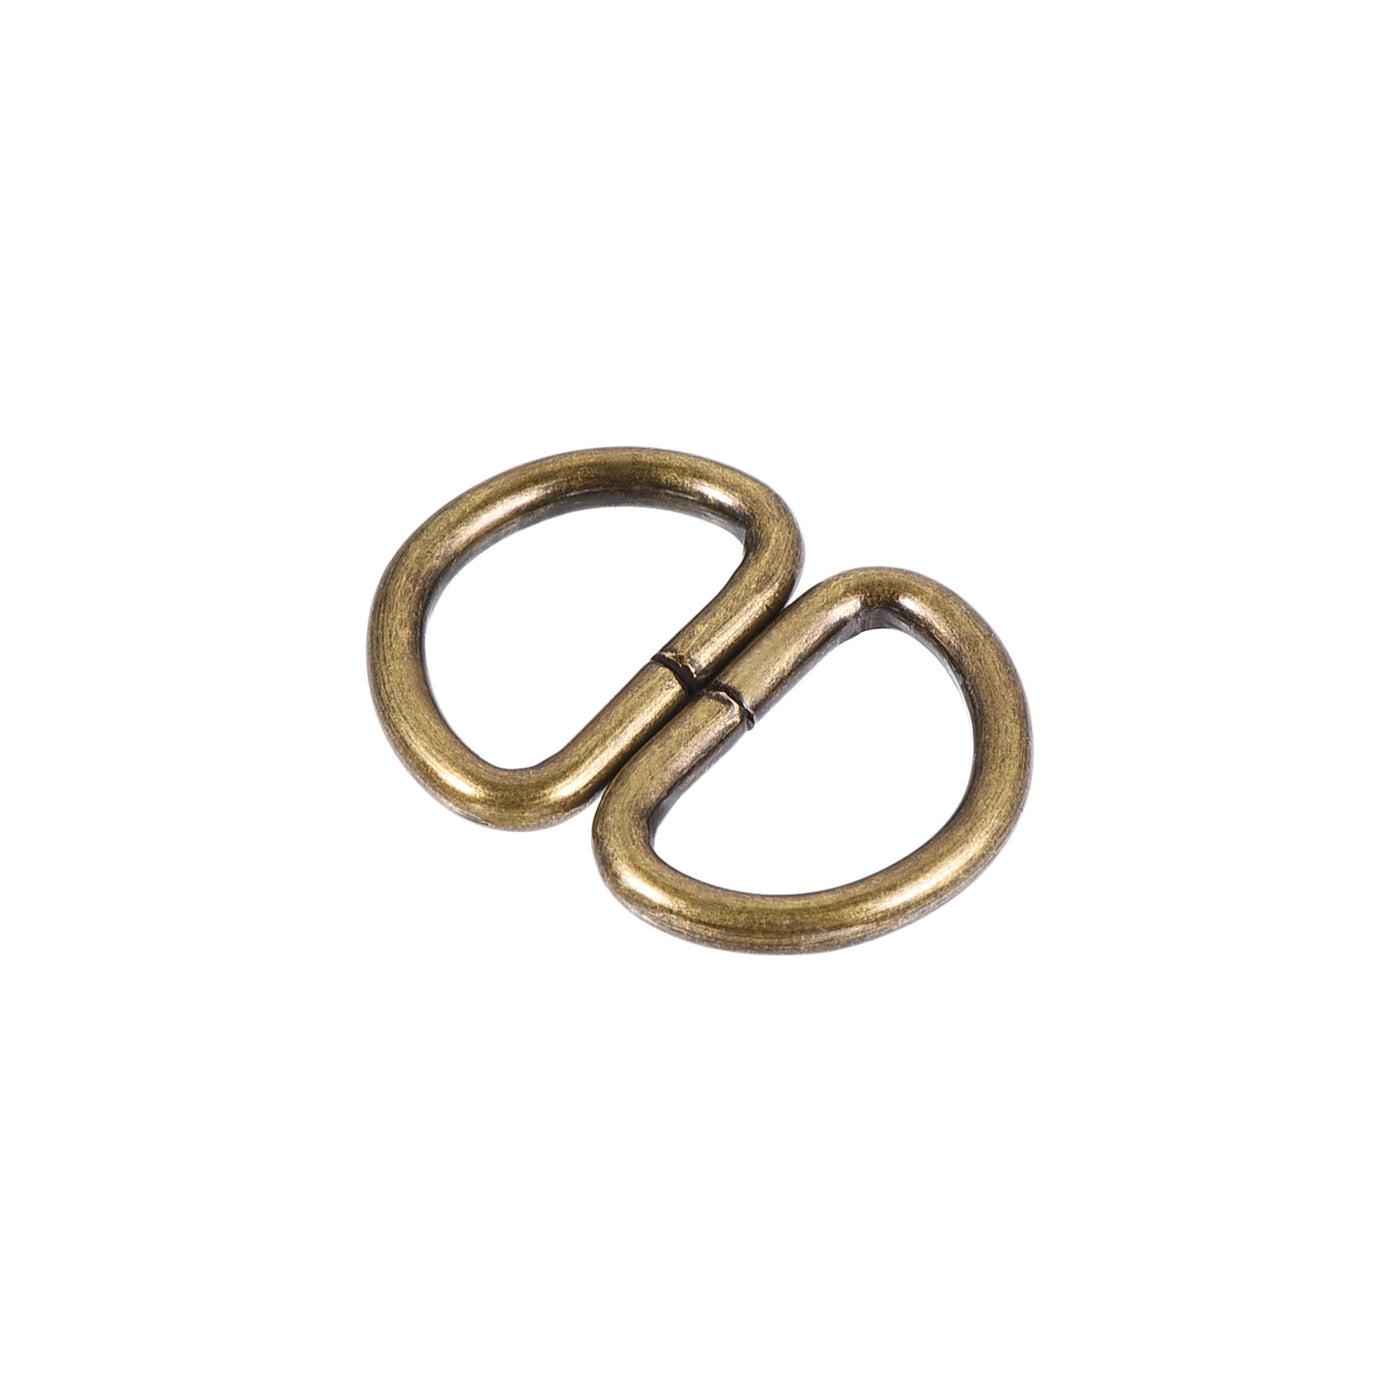 uxcell Uxcell Metal D Ring 0.39"(10mm) D-Rings Buckle for Hardware Bags Belts Craft DIY Accessories Bronze Tone 50pcs